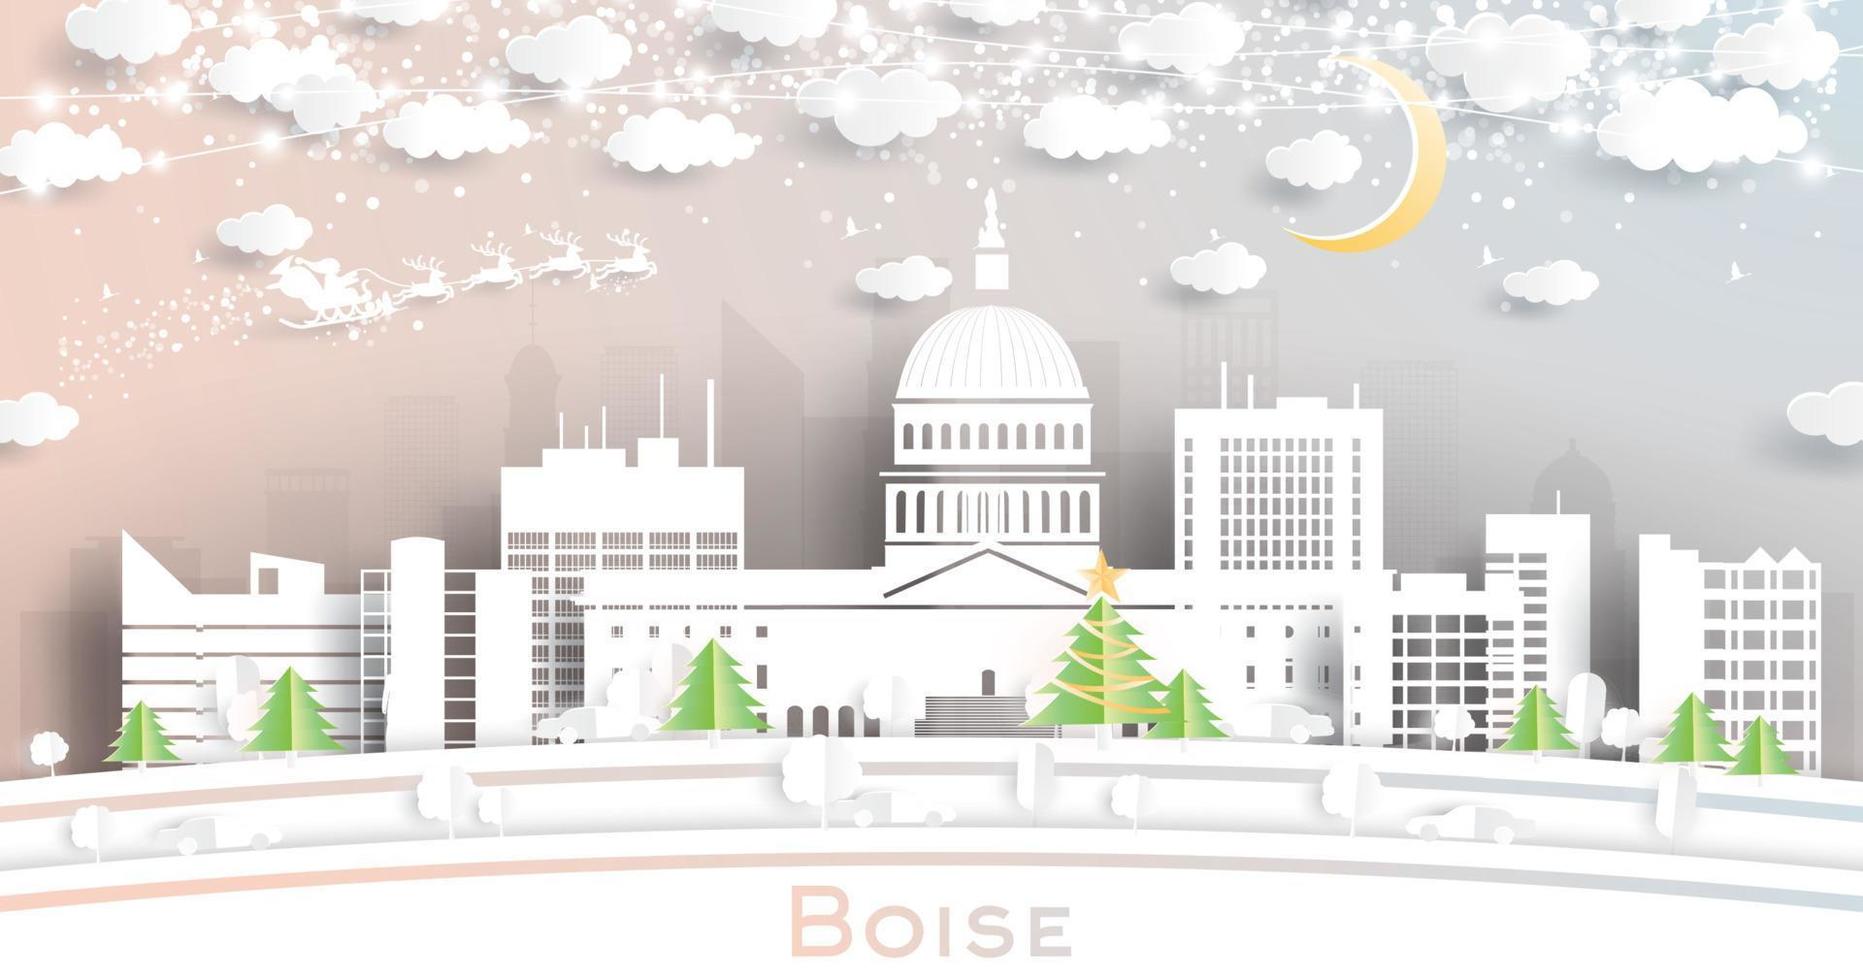 Boise Idaho USA City Skyline in Paper Cut Style with Snowflakes, Moon and Neon Garland. vector